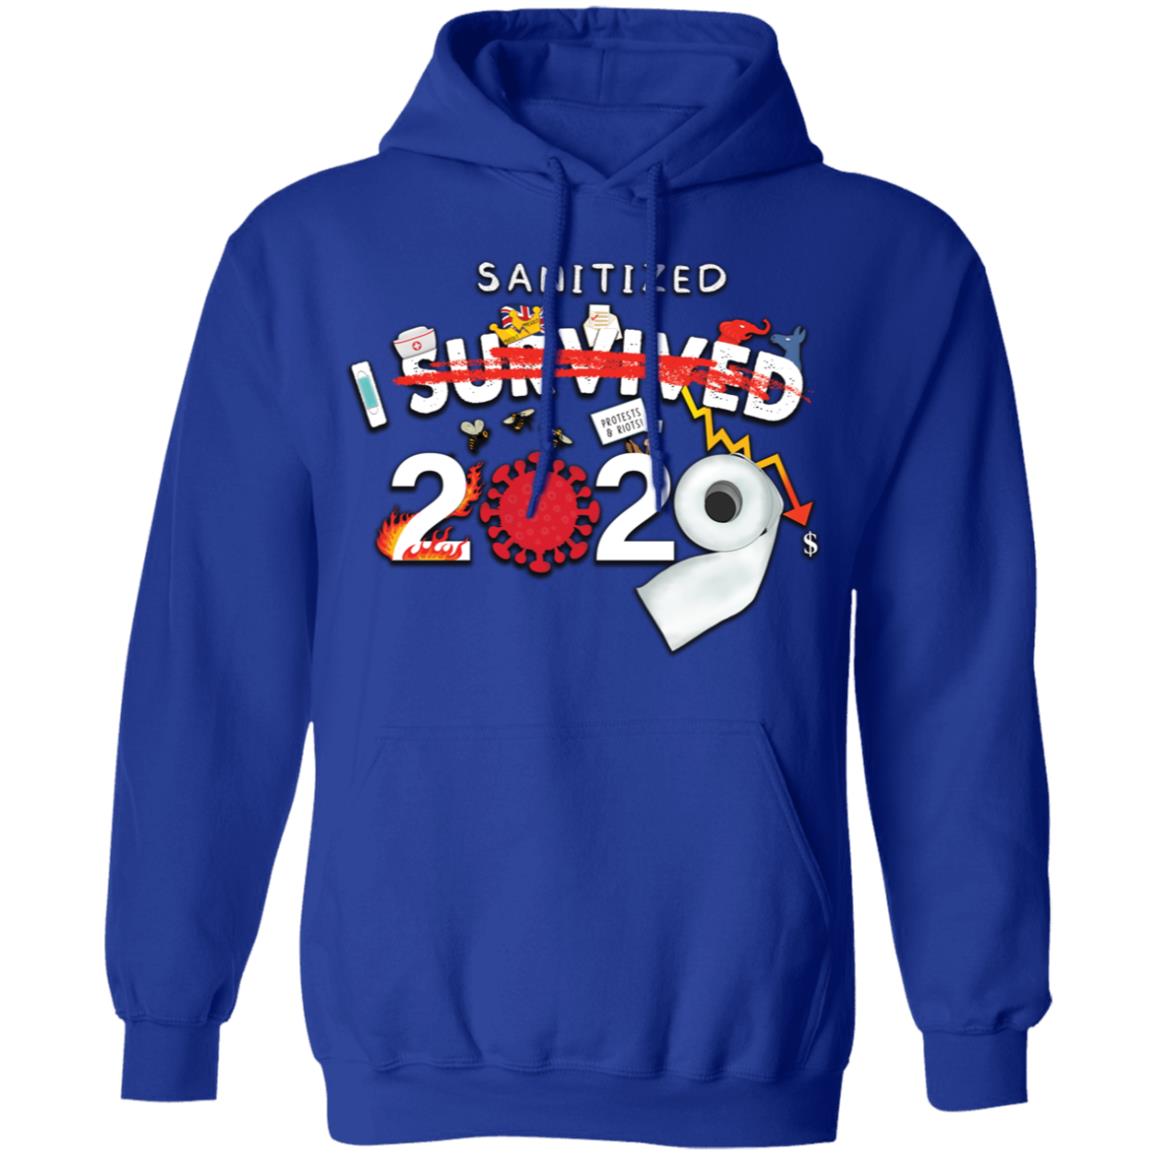 I Sanitized 2020 - Pullover Hoodie